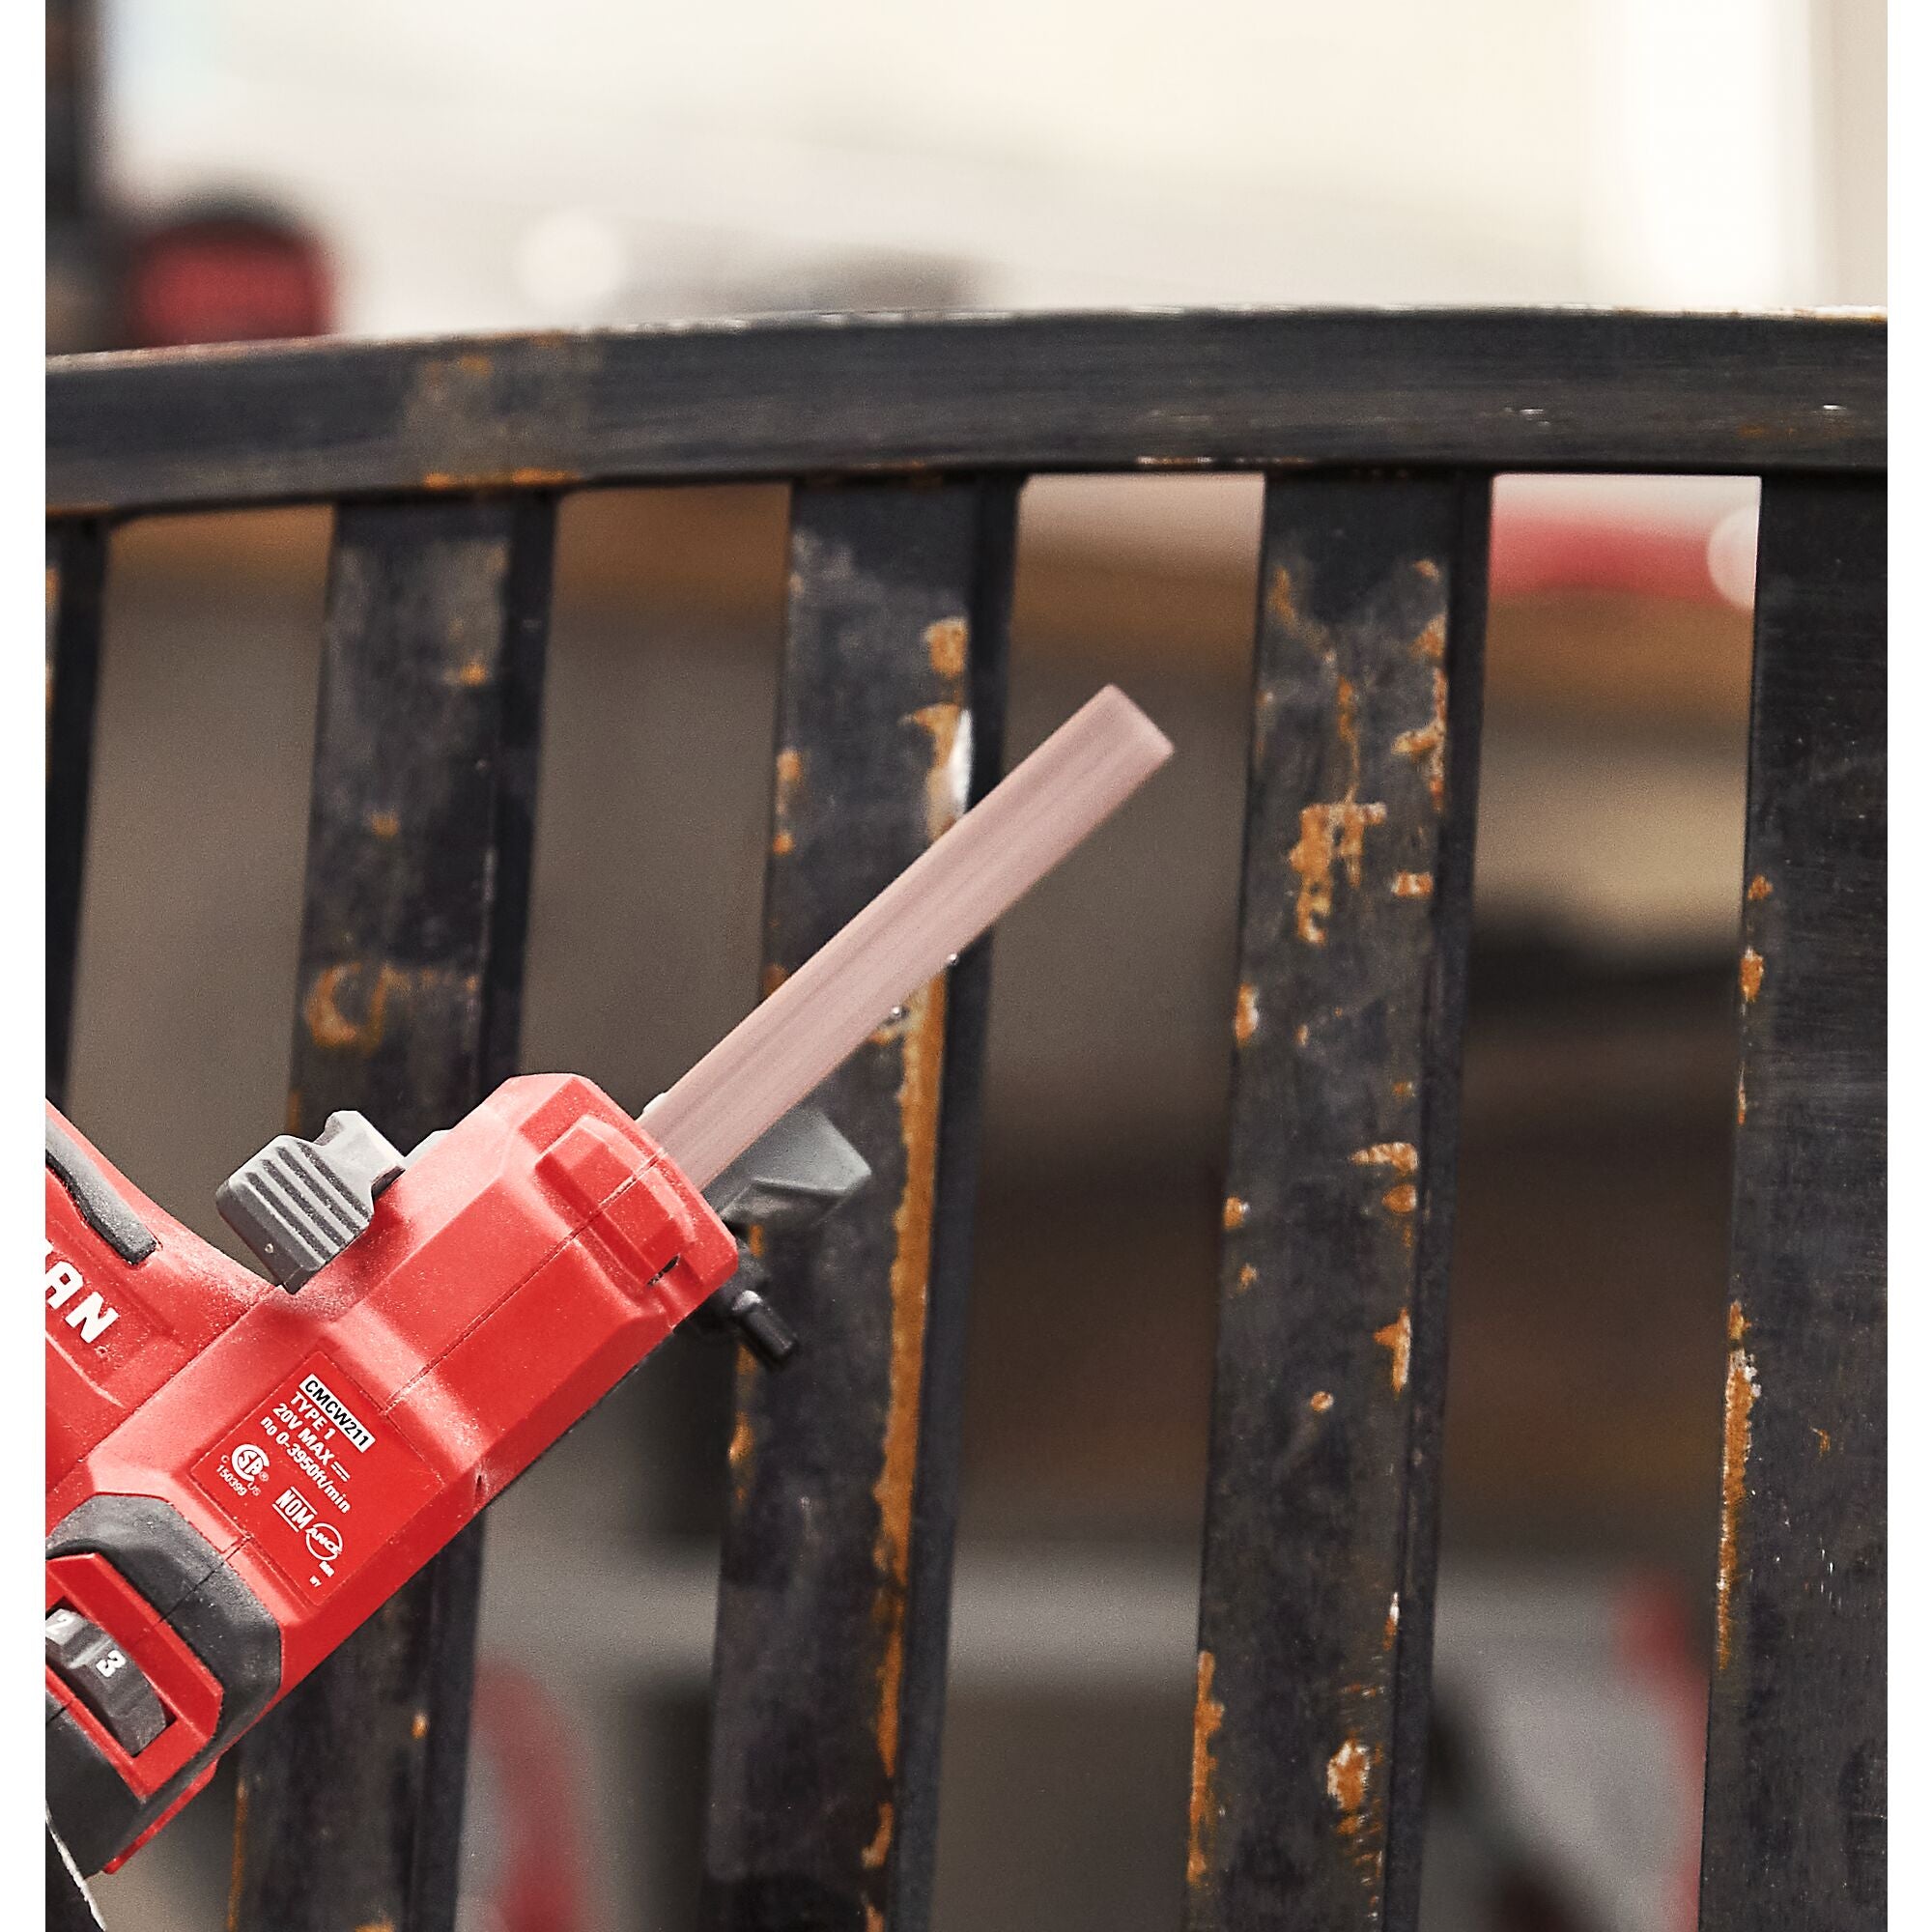 Craftsman V20 Powerfile removing rust from metal bench